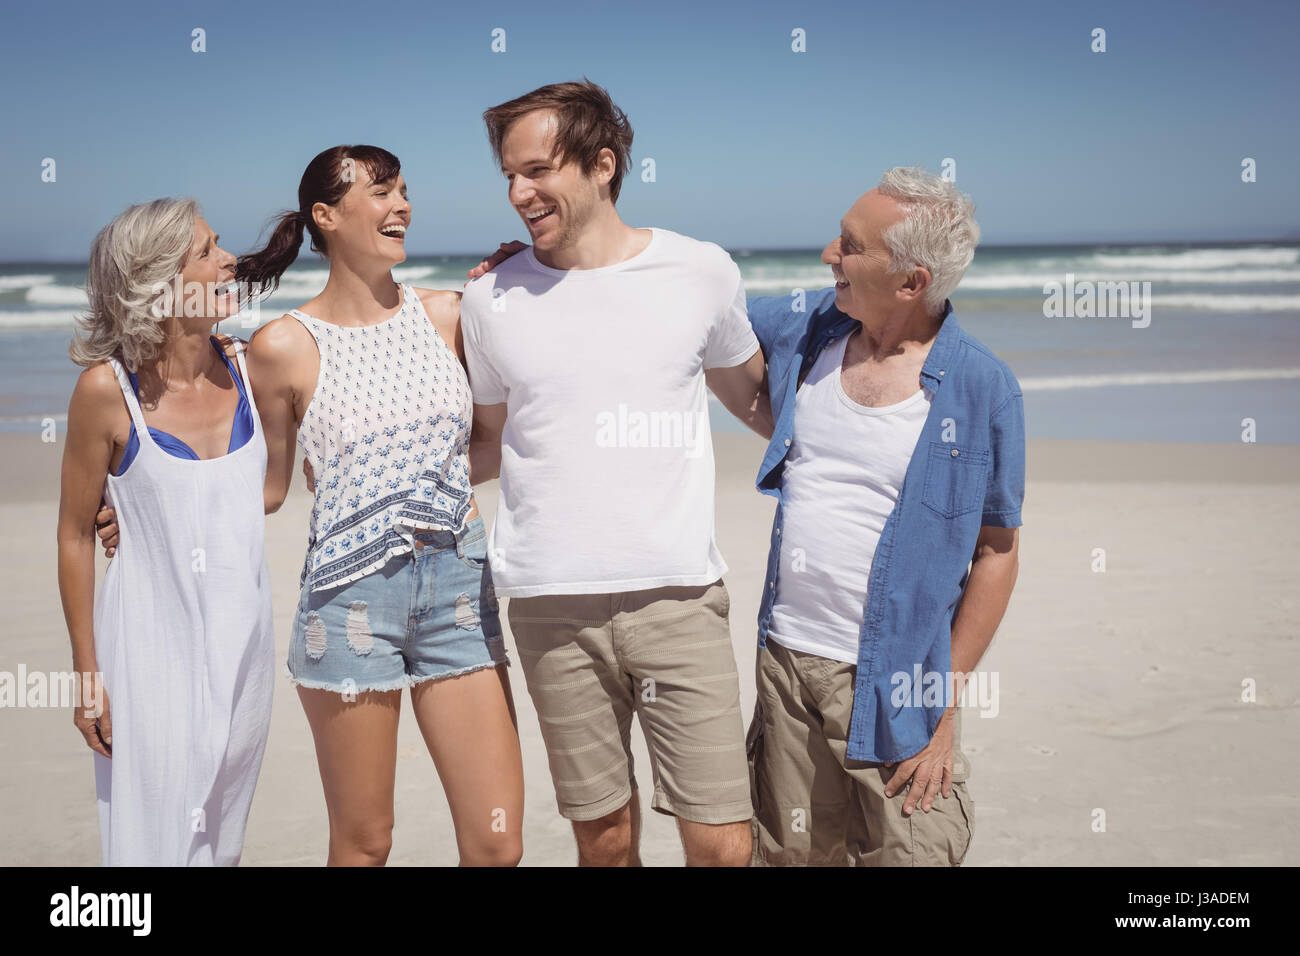 Happy family standing side by side at beach during sunny day Stock Photo